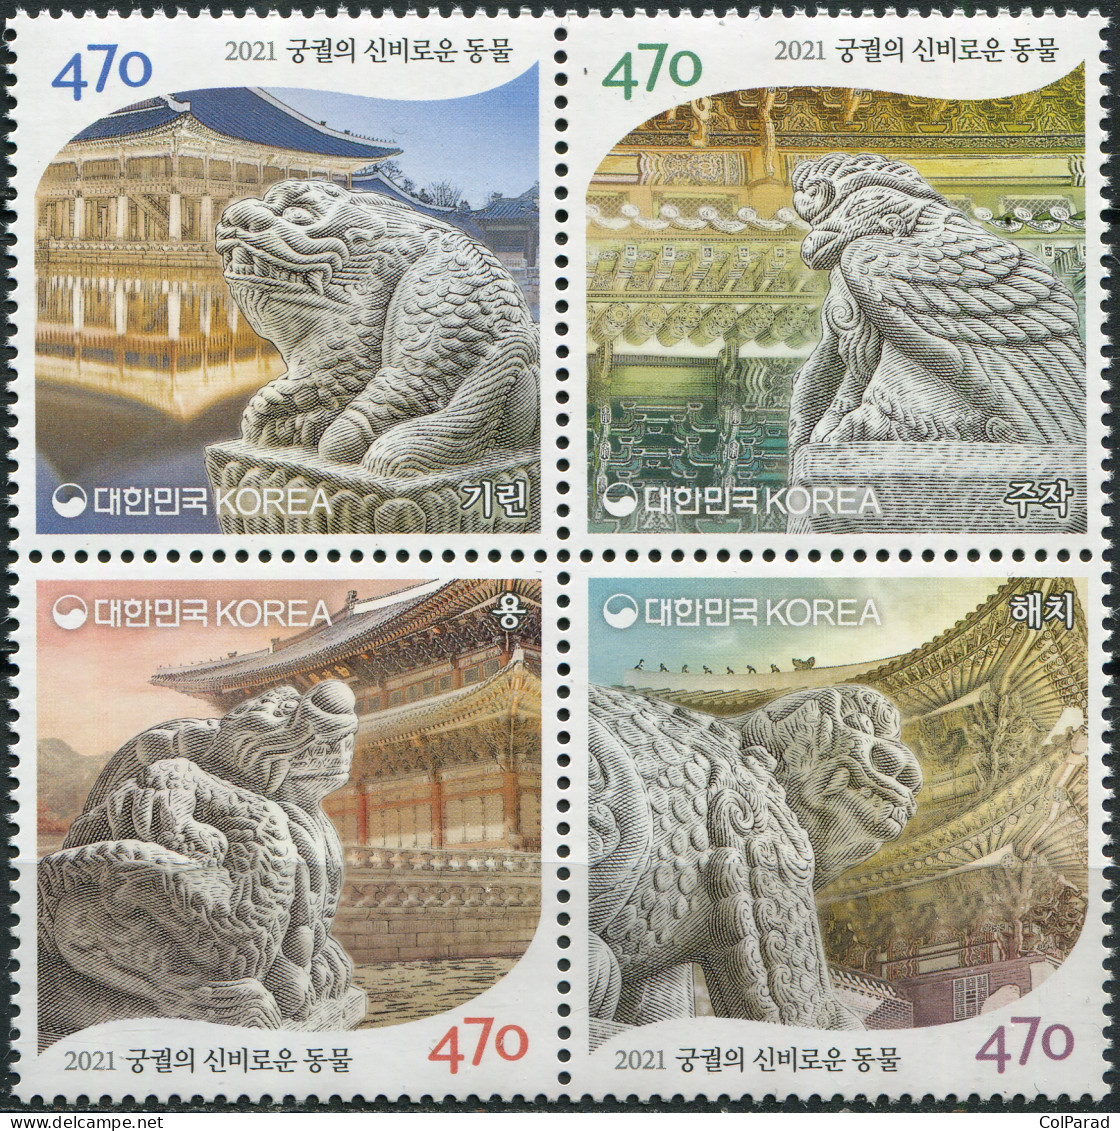 SOUTH KOREA - 2021 - BLOCK OF 4 STAMPS MNH ** - Statues Of Mythical Creatures - Korea (Süd-)